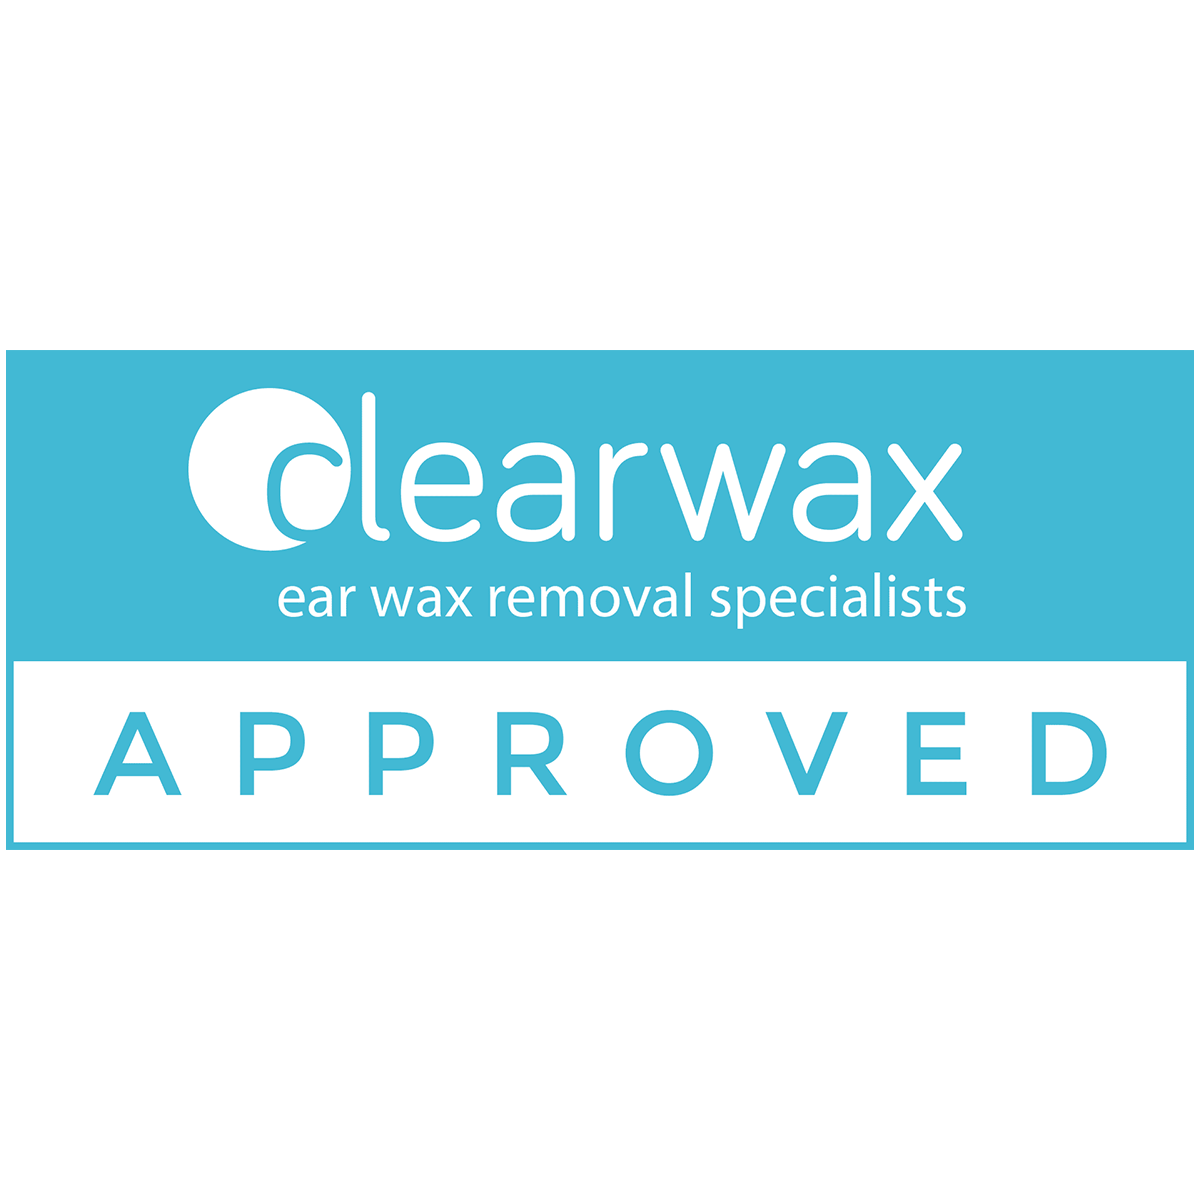 Clearwax Approved large logo